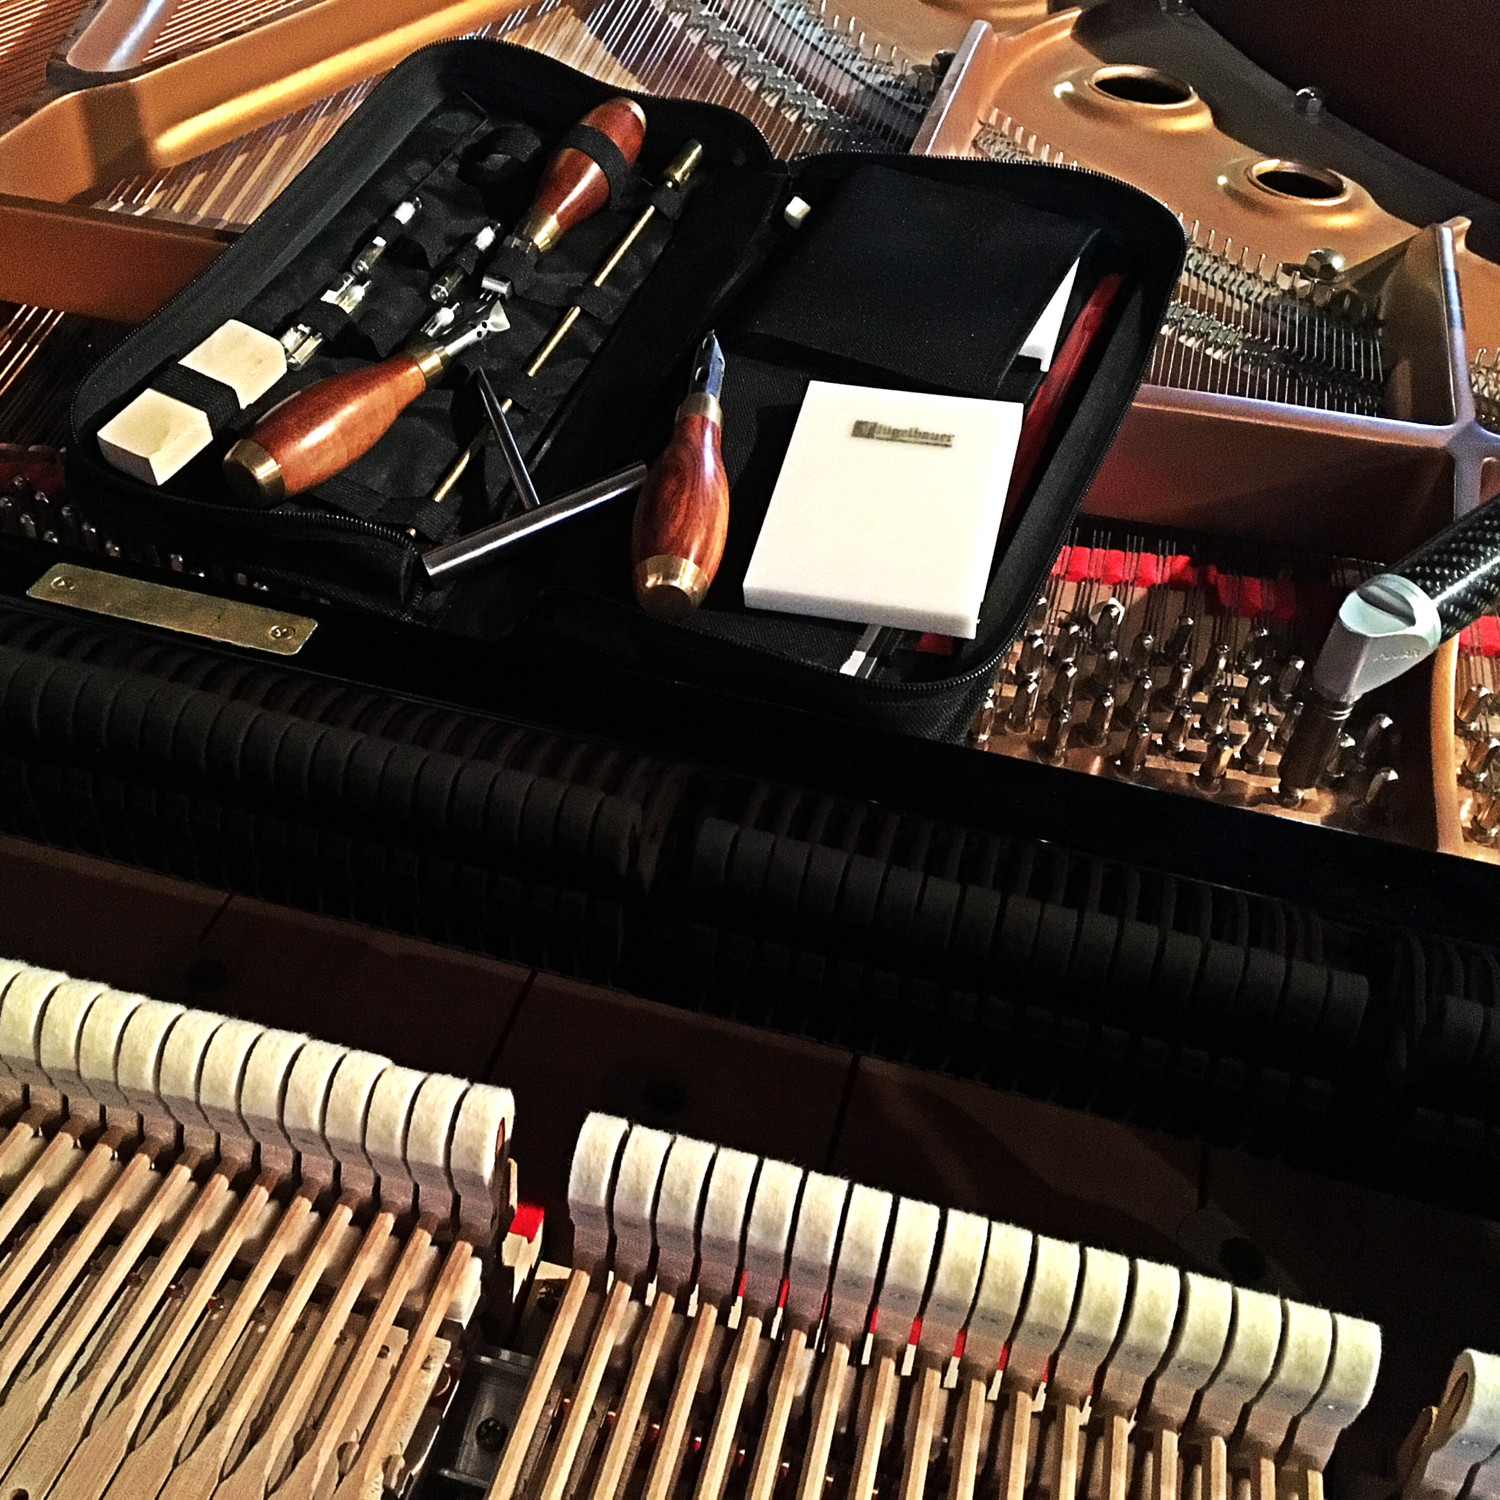 What Tools Are Needed To Tune A Piano